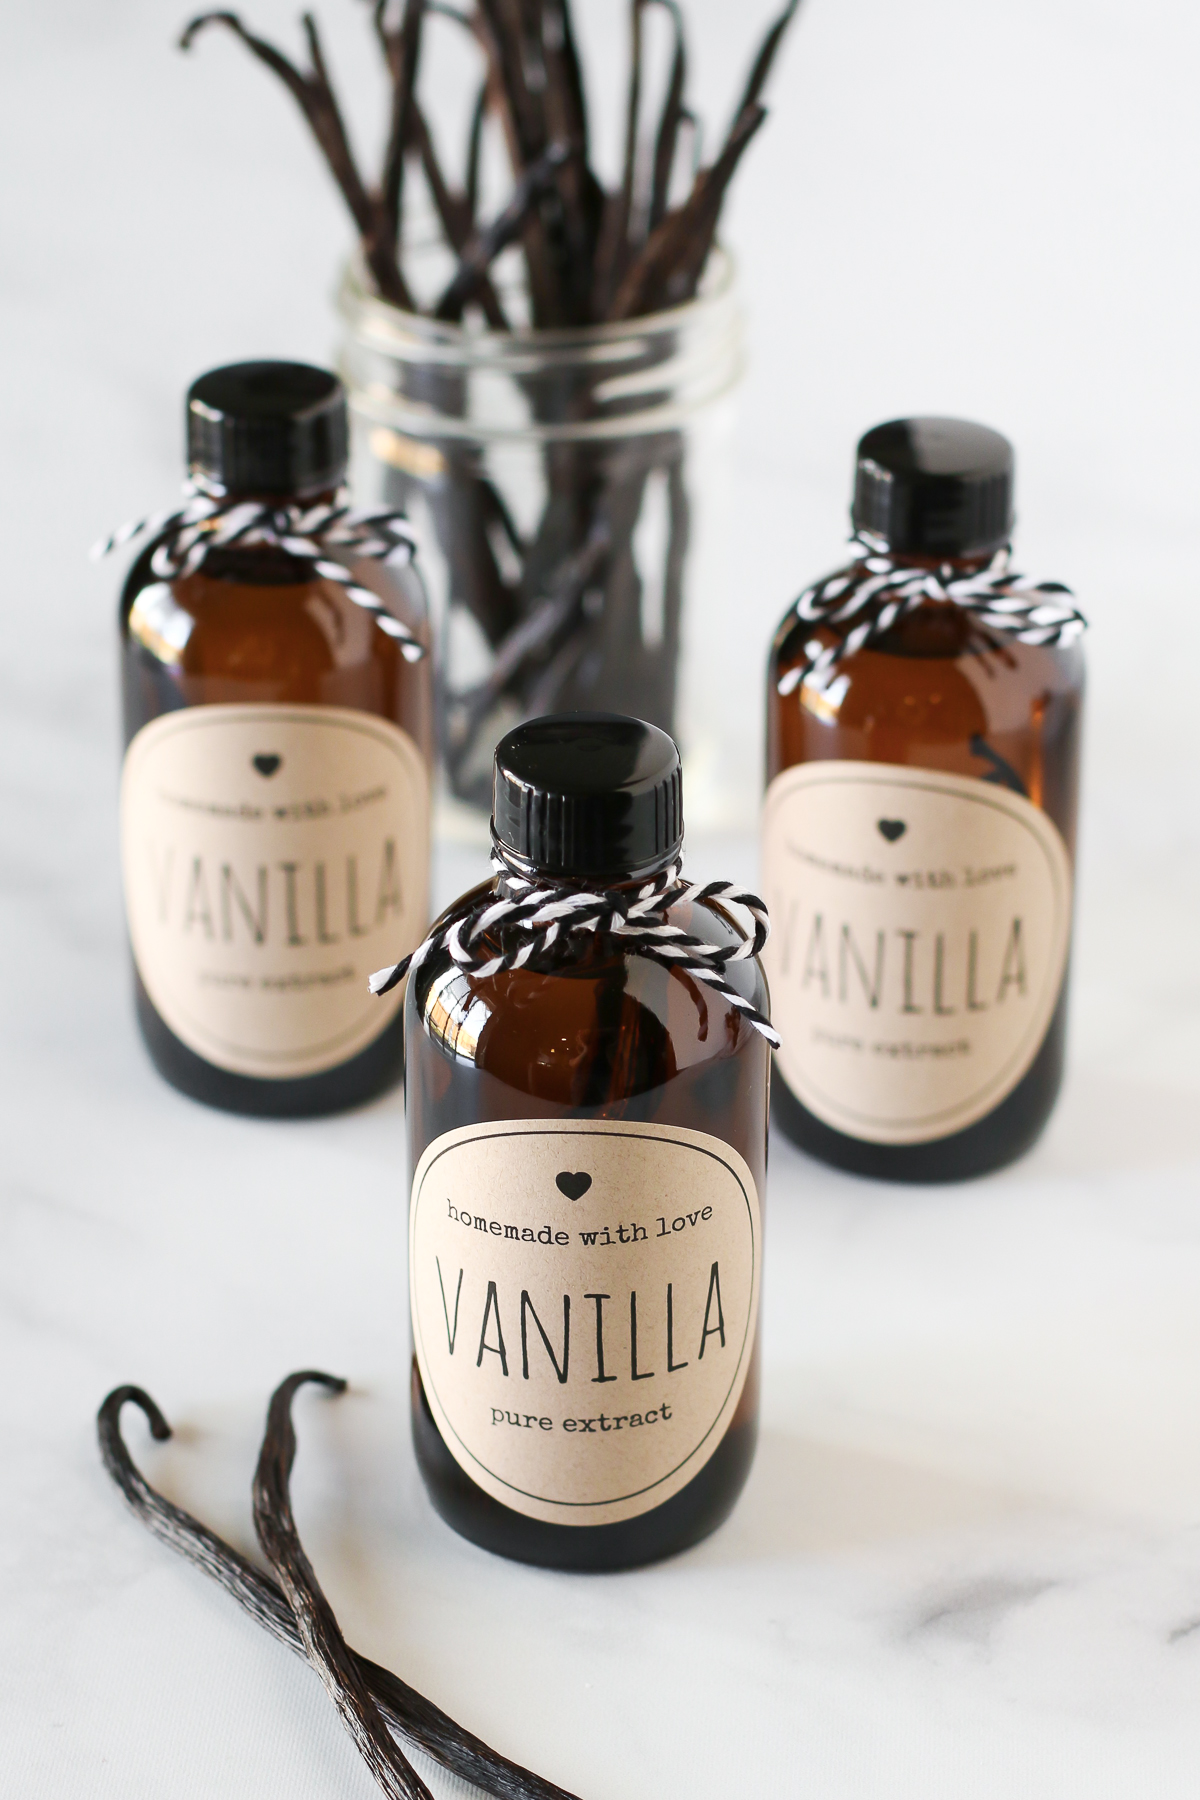 vanilla flavoring come from